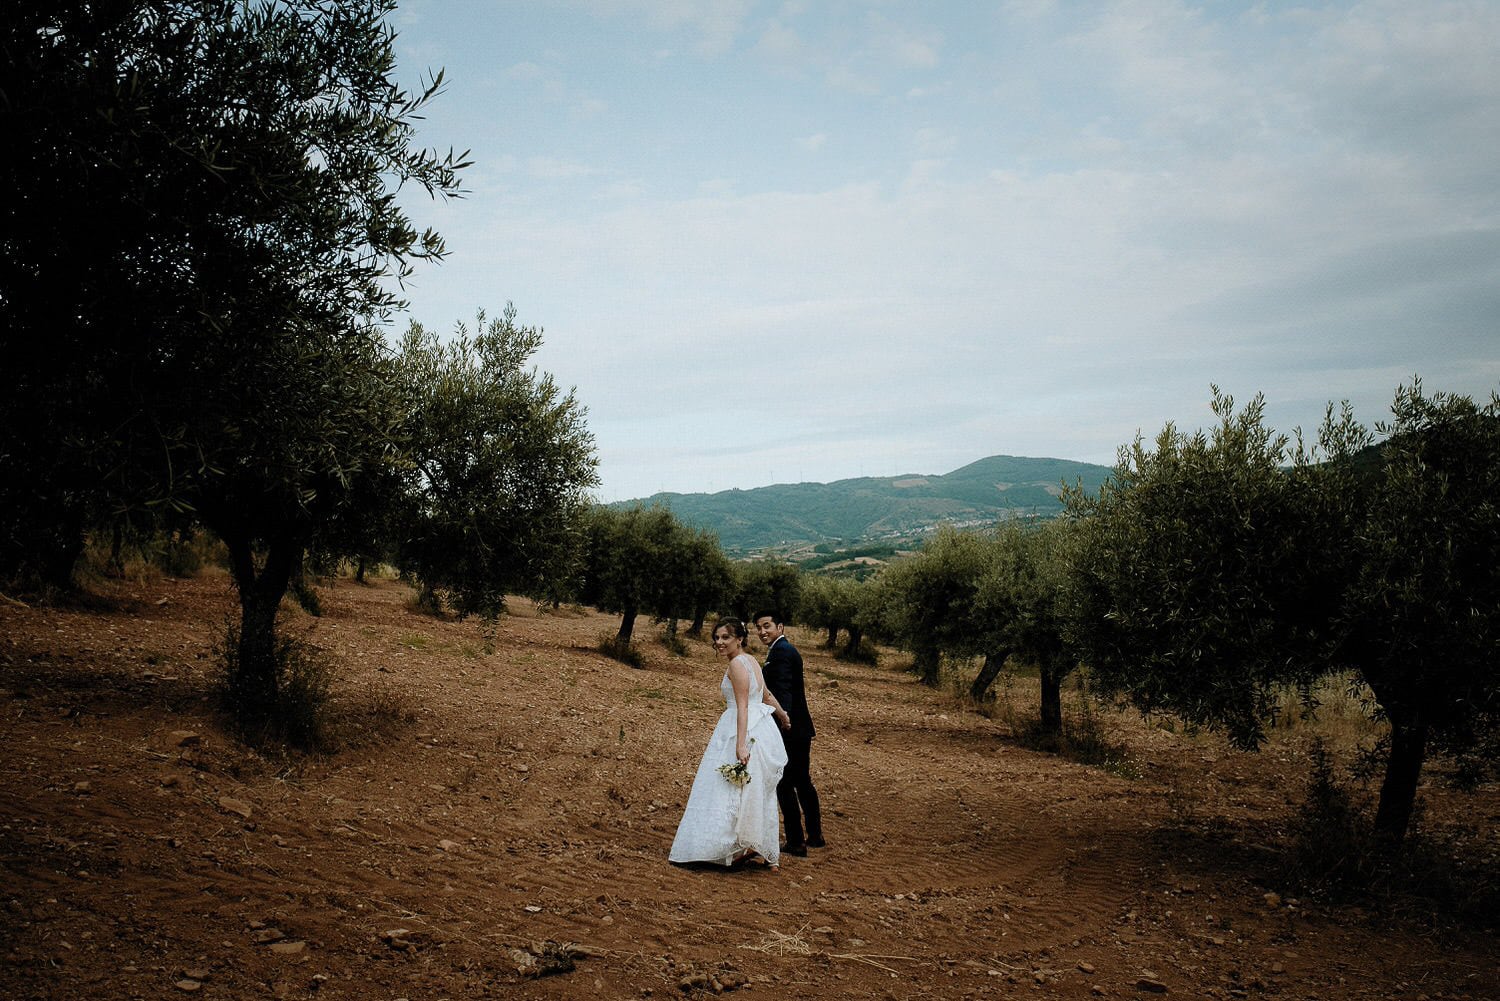 Charming Destination Wedding in the Portuguese Countryside - bride and groom surrounded by olive trees